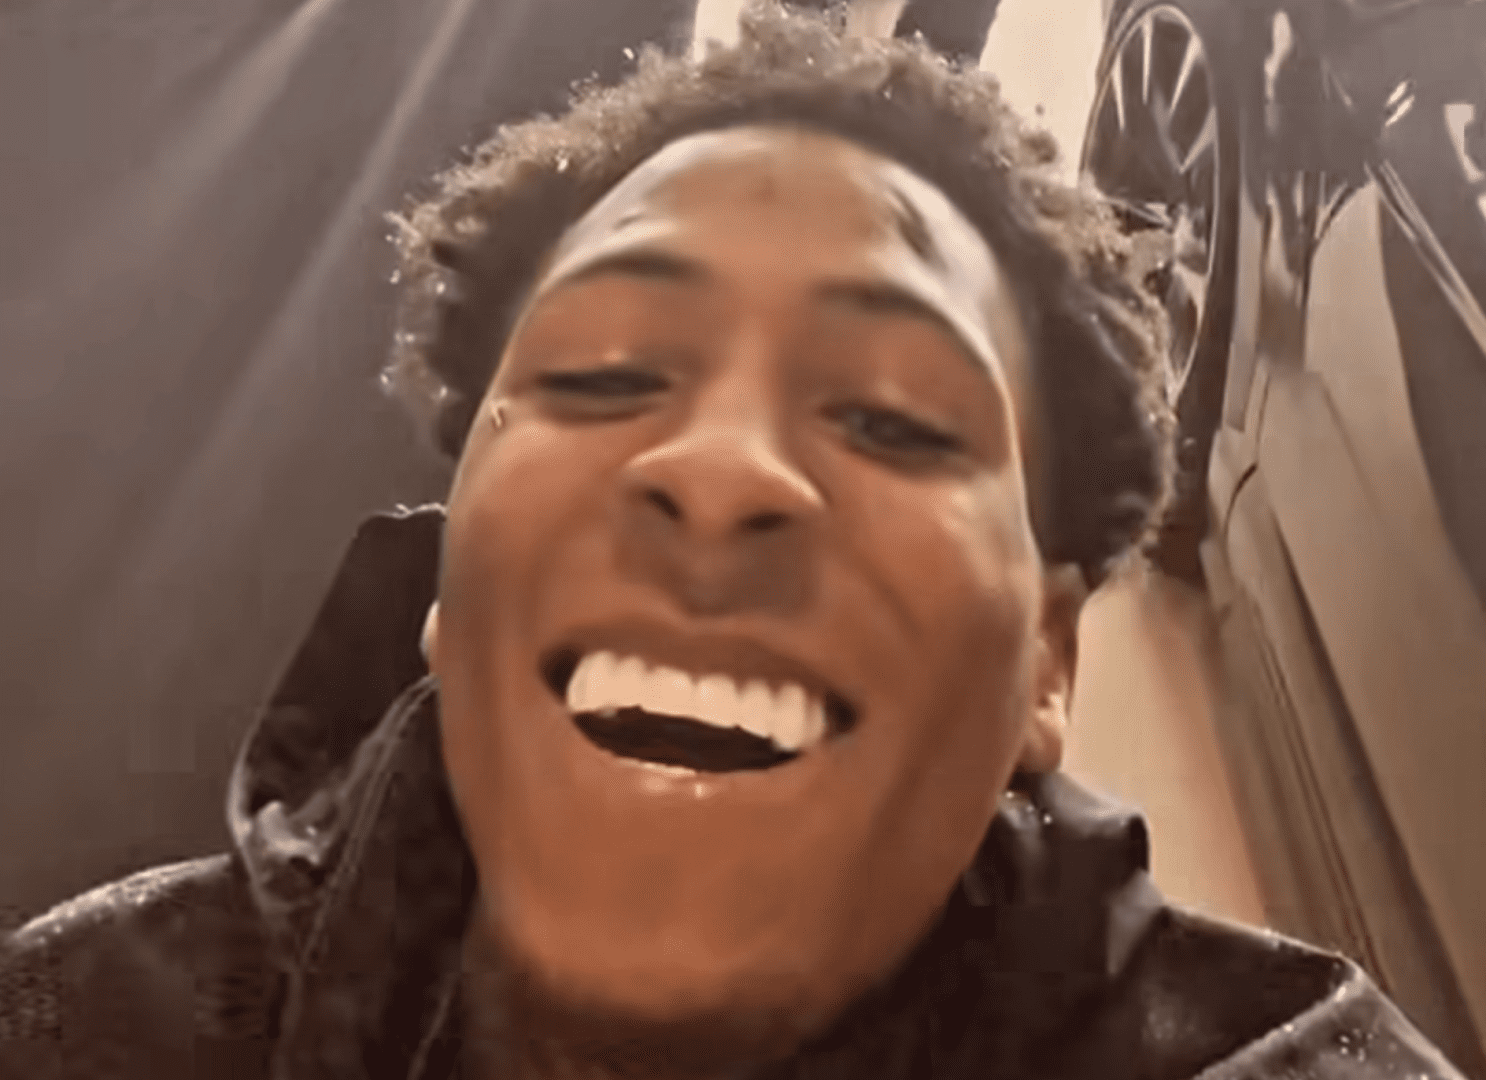 NBA Youngboy hit with new drug fraud charges worsening an already bad situation